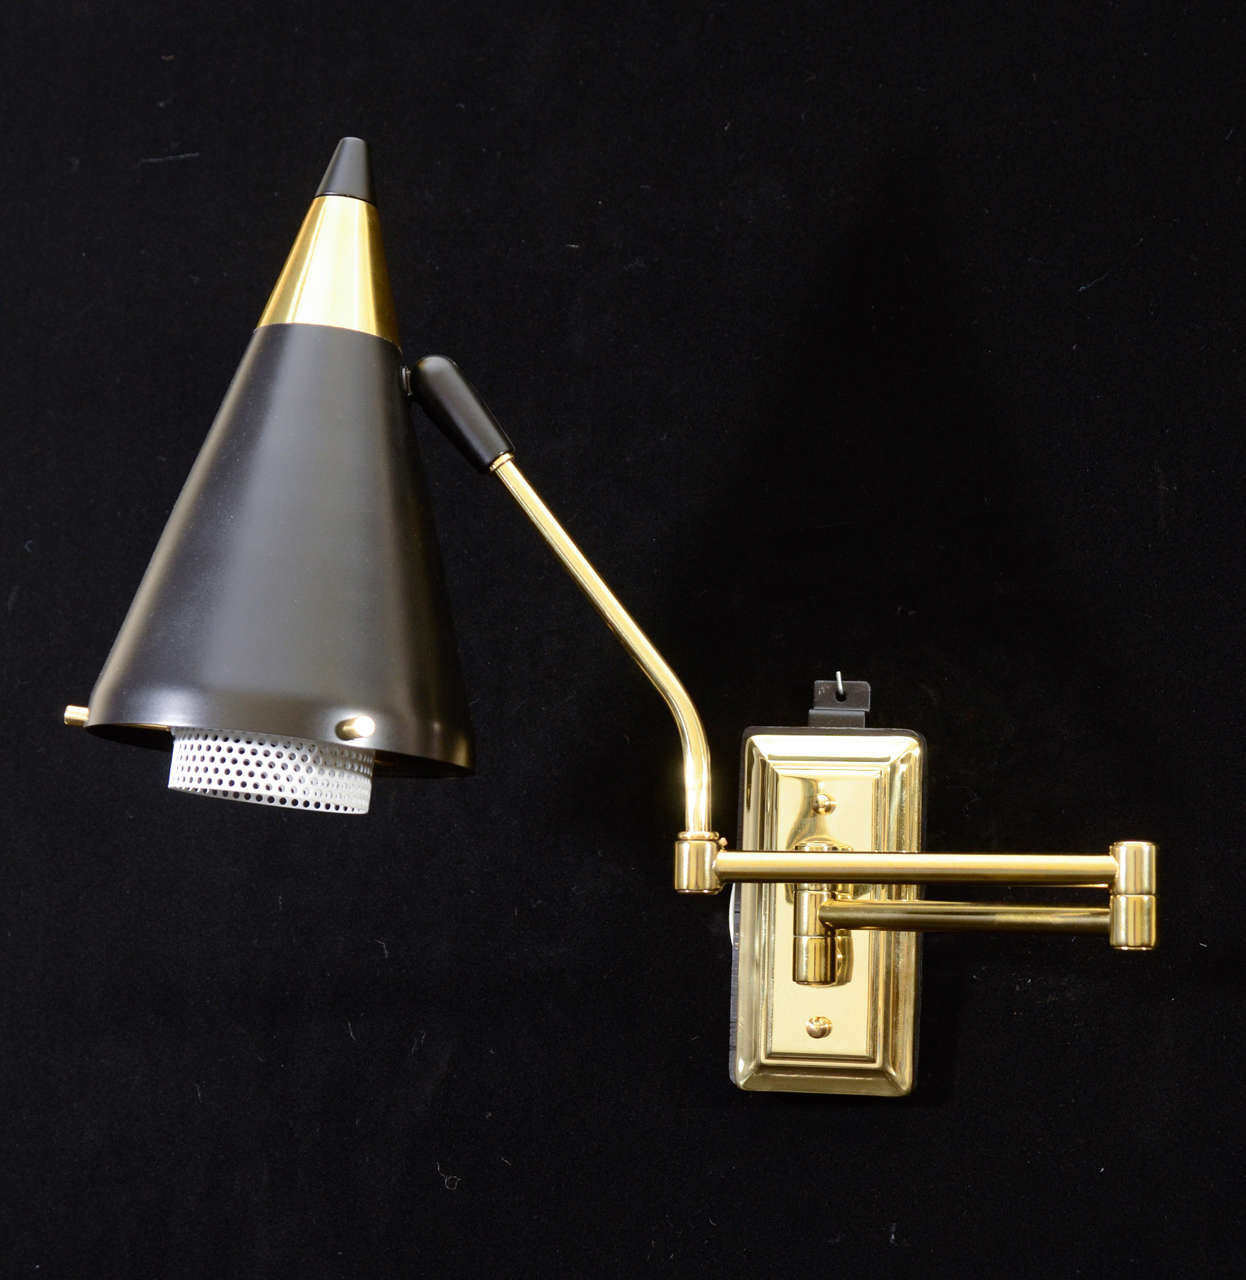 Pair of One Light Polished And Polychromed Brass Swing Arm Sconces With Tubular Diffuser.  The Top of The Cone Has An On/Off Switch.